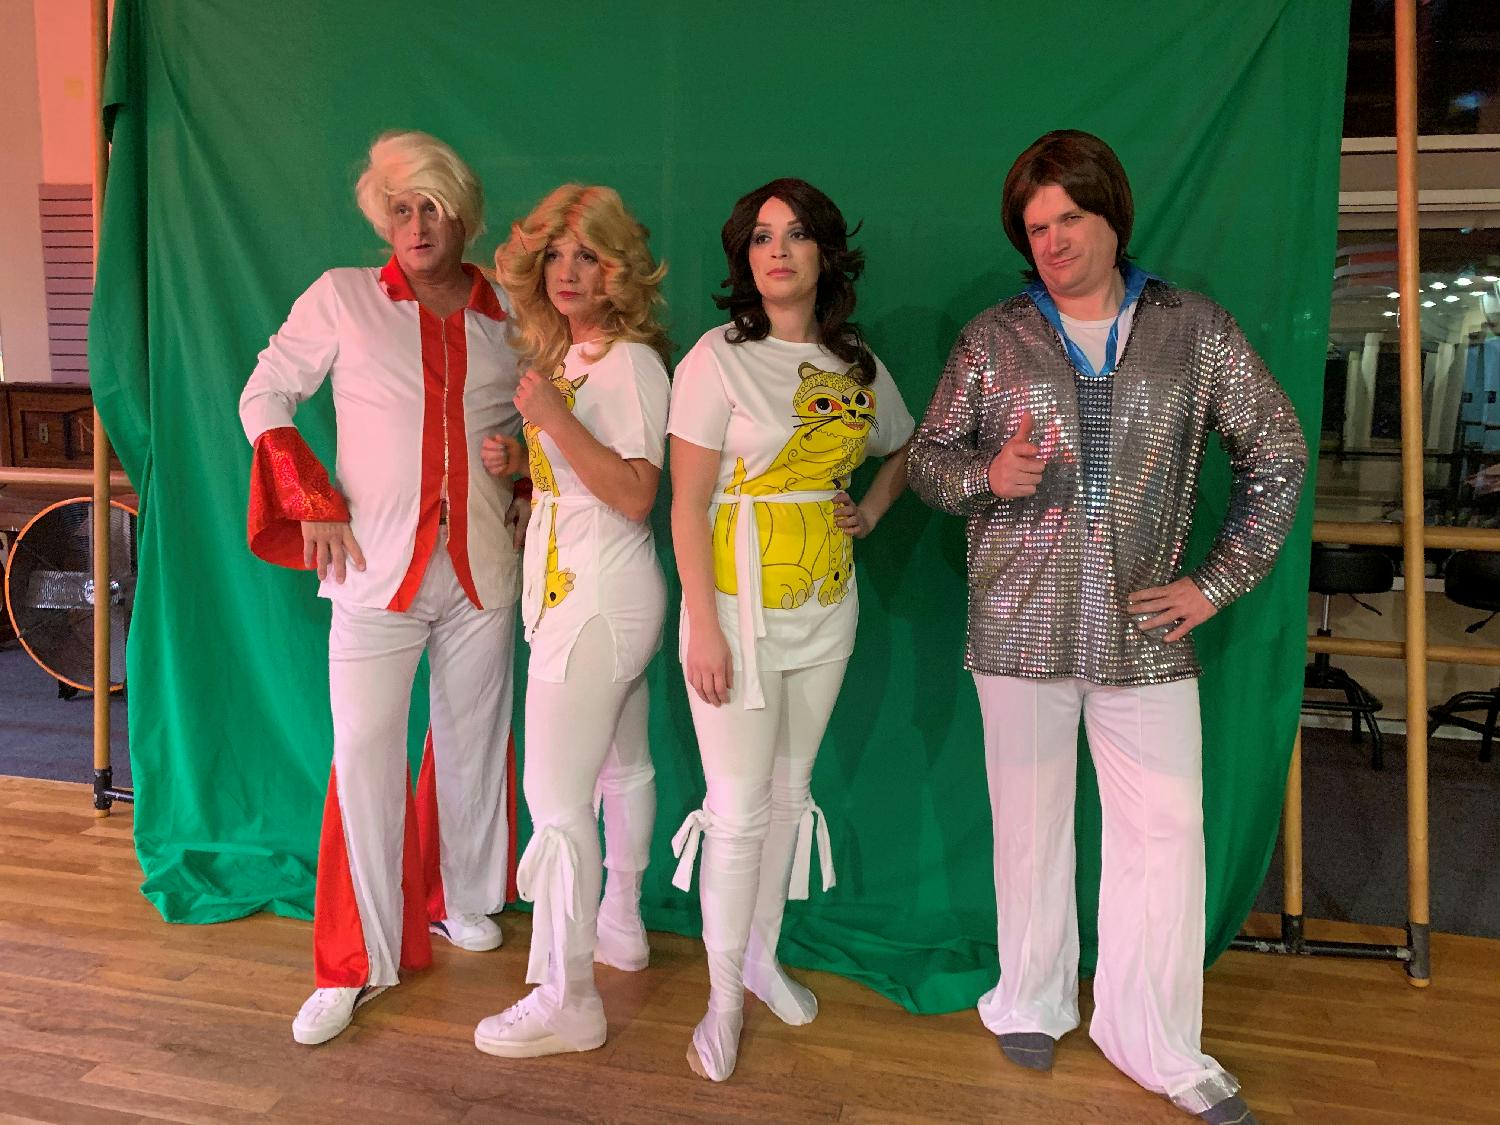 Each year we celebrate success in the form of a Holiday Party. This was our rendition of ABBA.